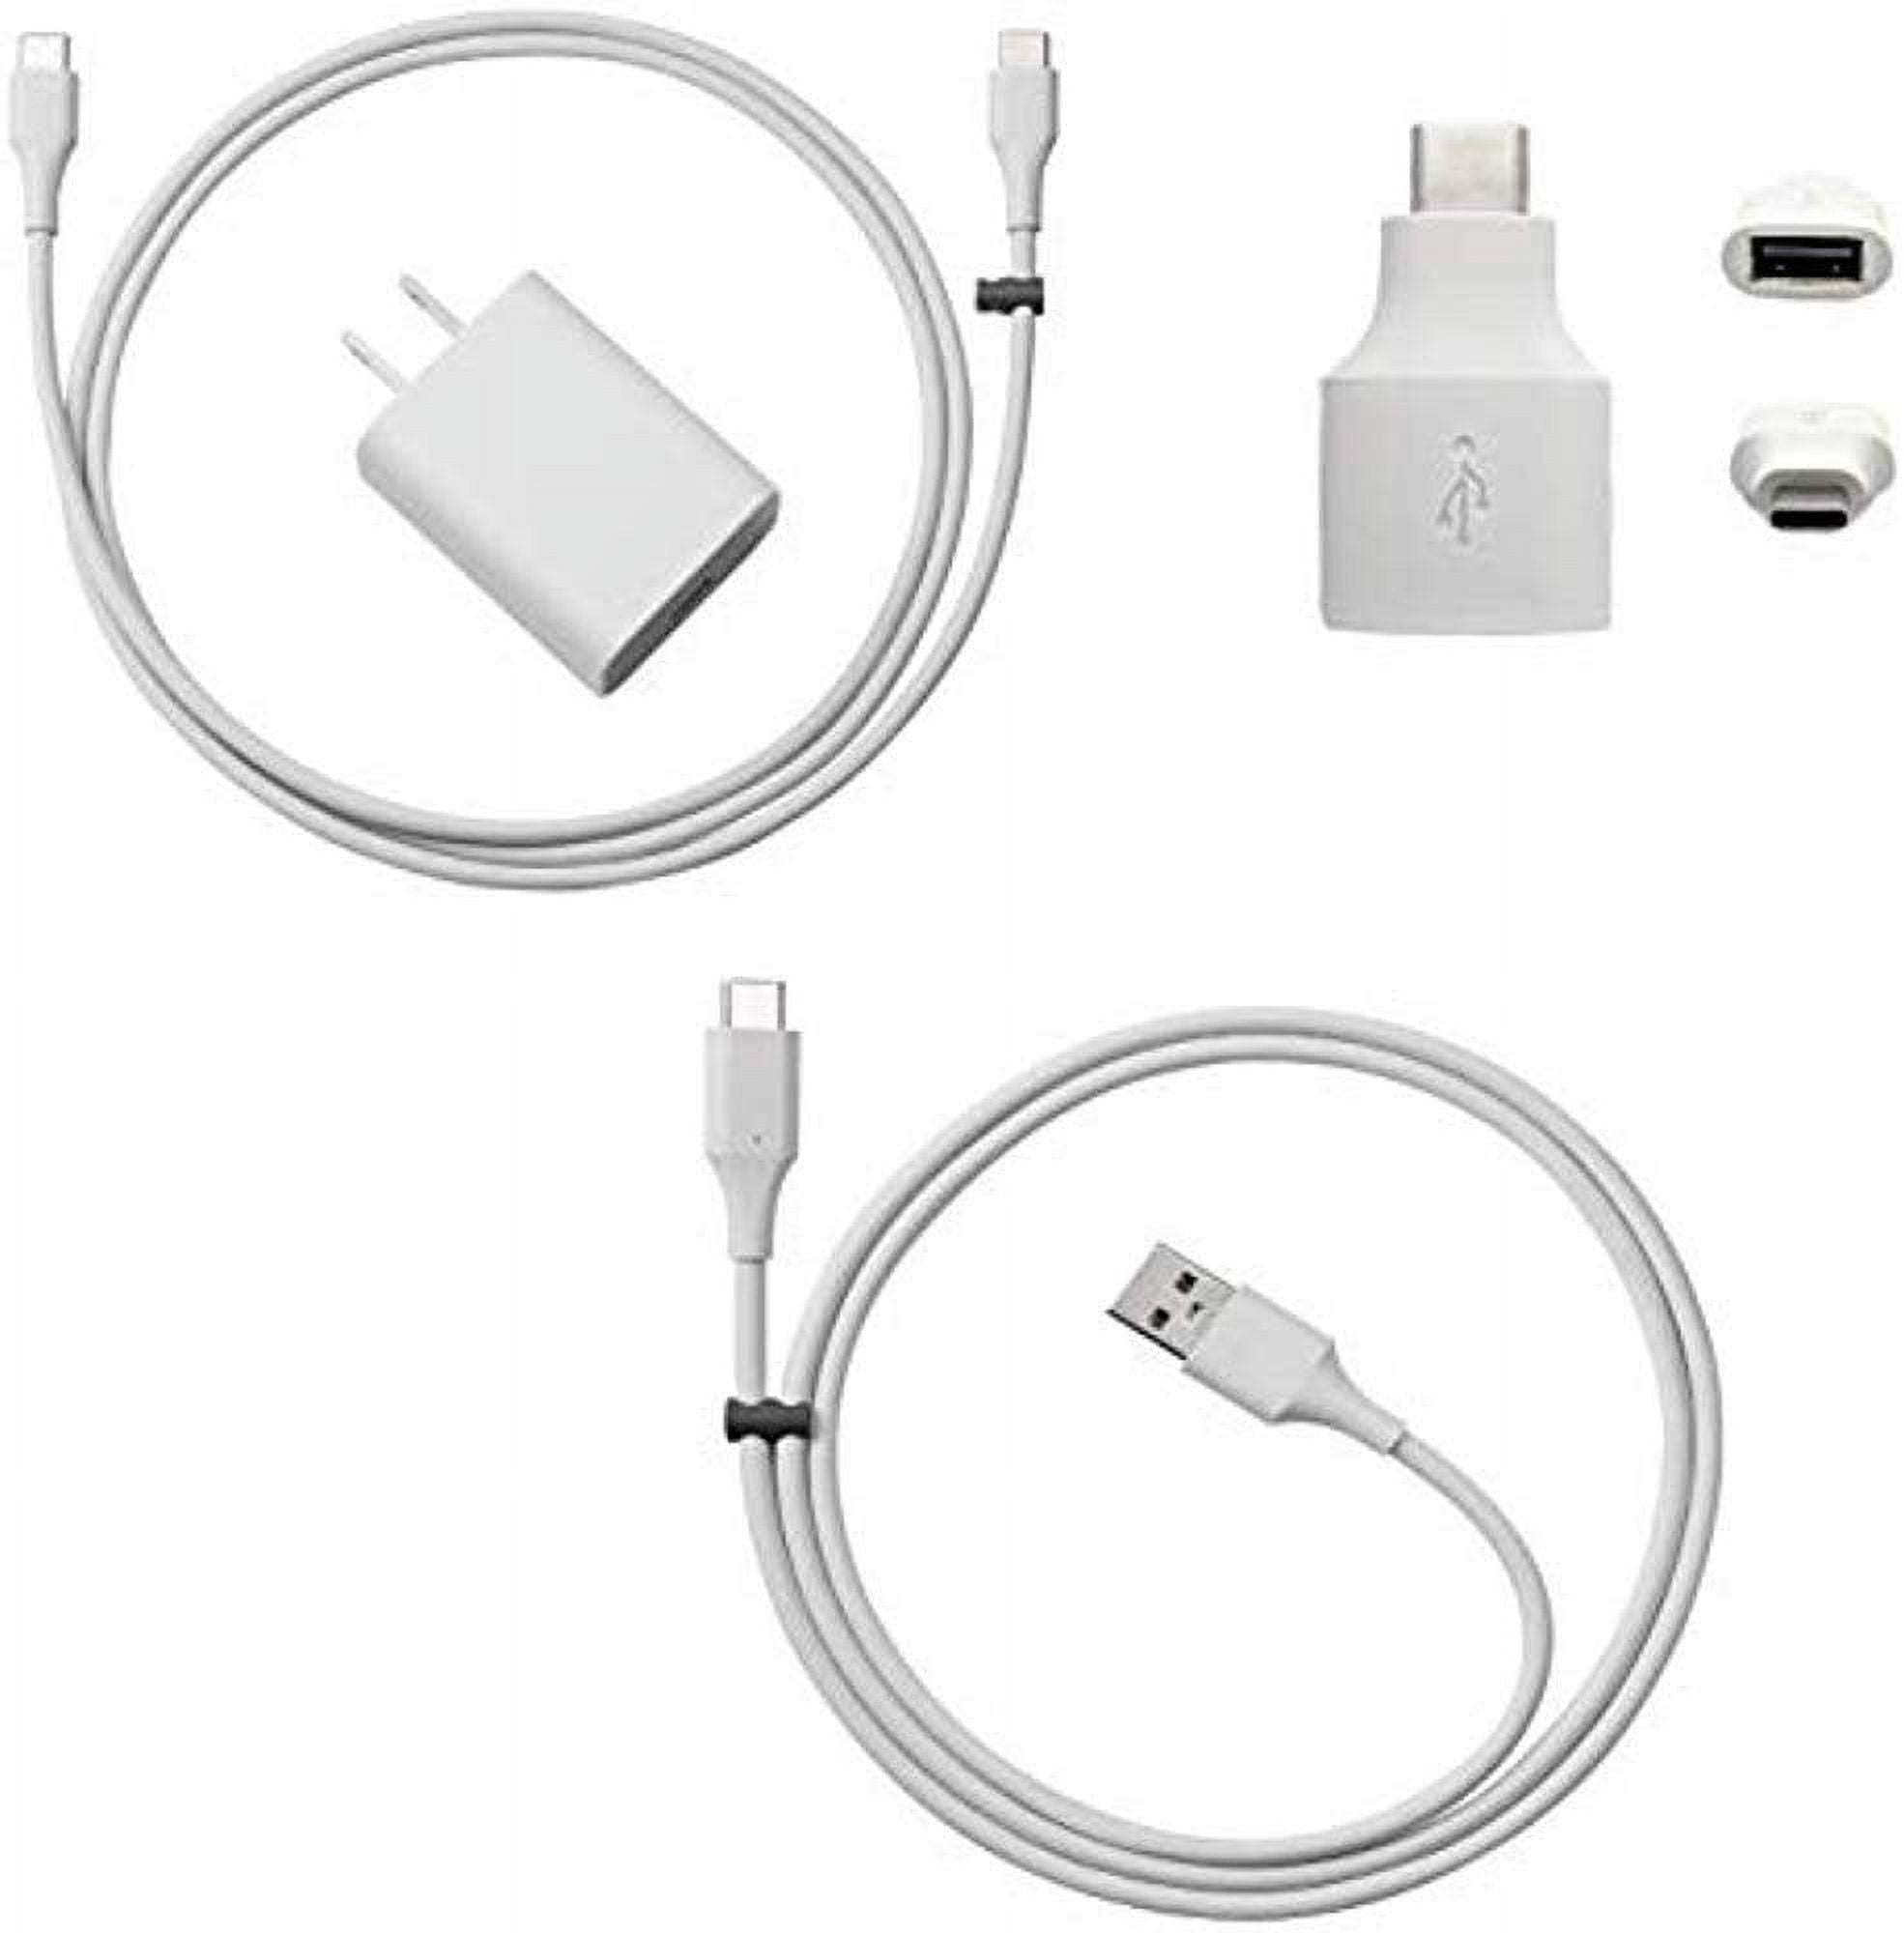 Google Pixel 7a and Pixel 30W Charger Bundle – Unlocked Android 5G